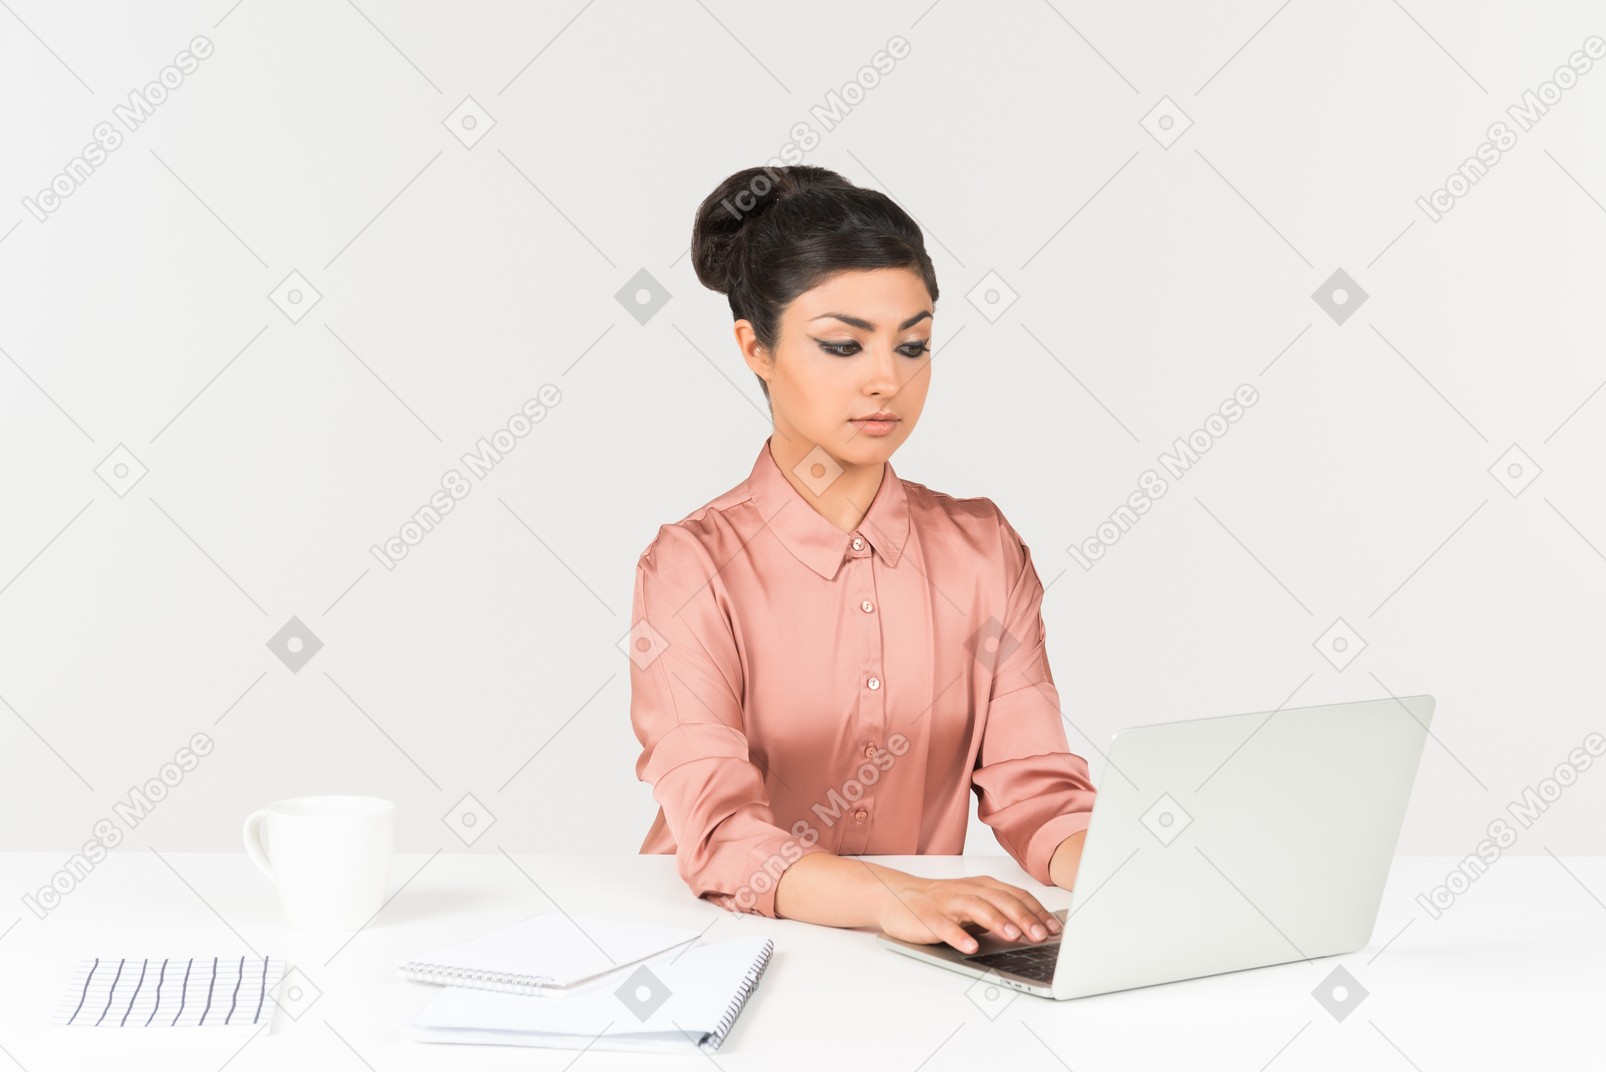 Young indian office employee working on laptop